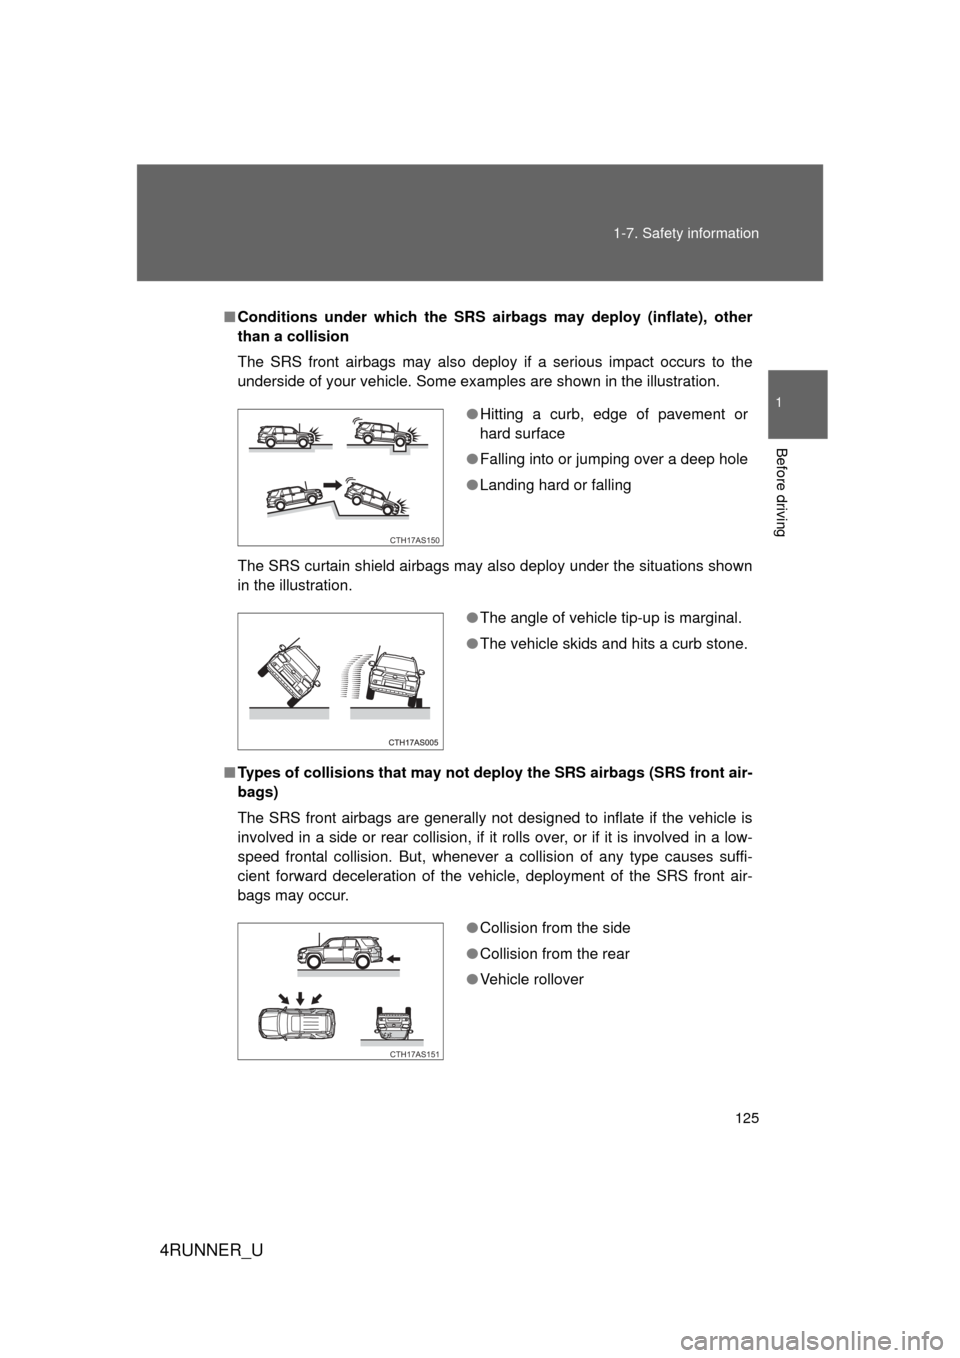 TOYOTA 4RUNNER 2013 N280 / 5.G Owners Manual 125
1-7. Safety information
1
Before driving
4RUNNER_U
■
Conditions under which the SRS airbags may deploy (inflate), other
than a collision
The SRS front airbags may also deploy if a serious impact